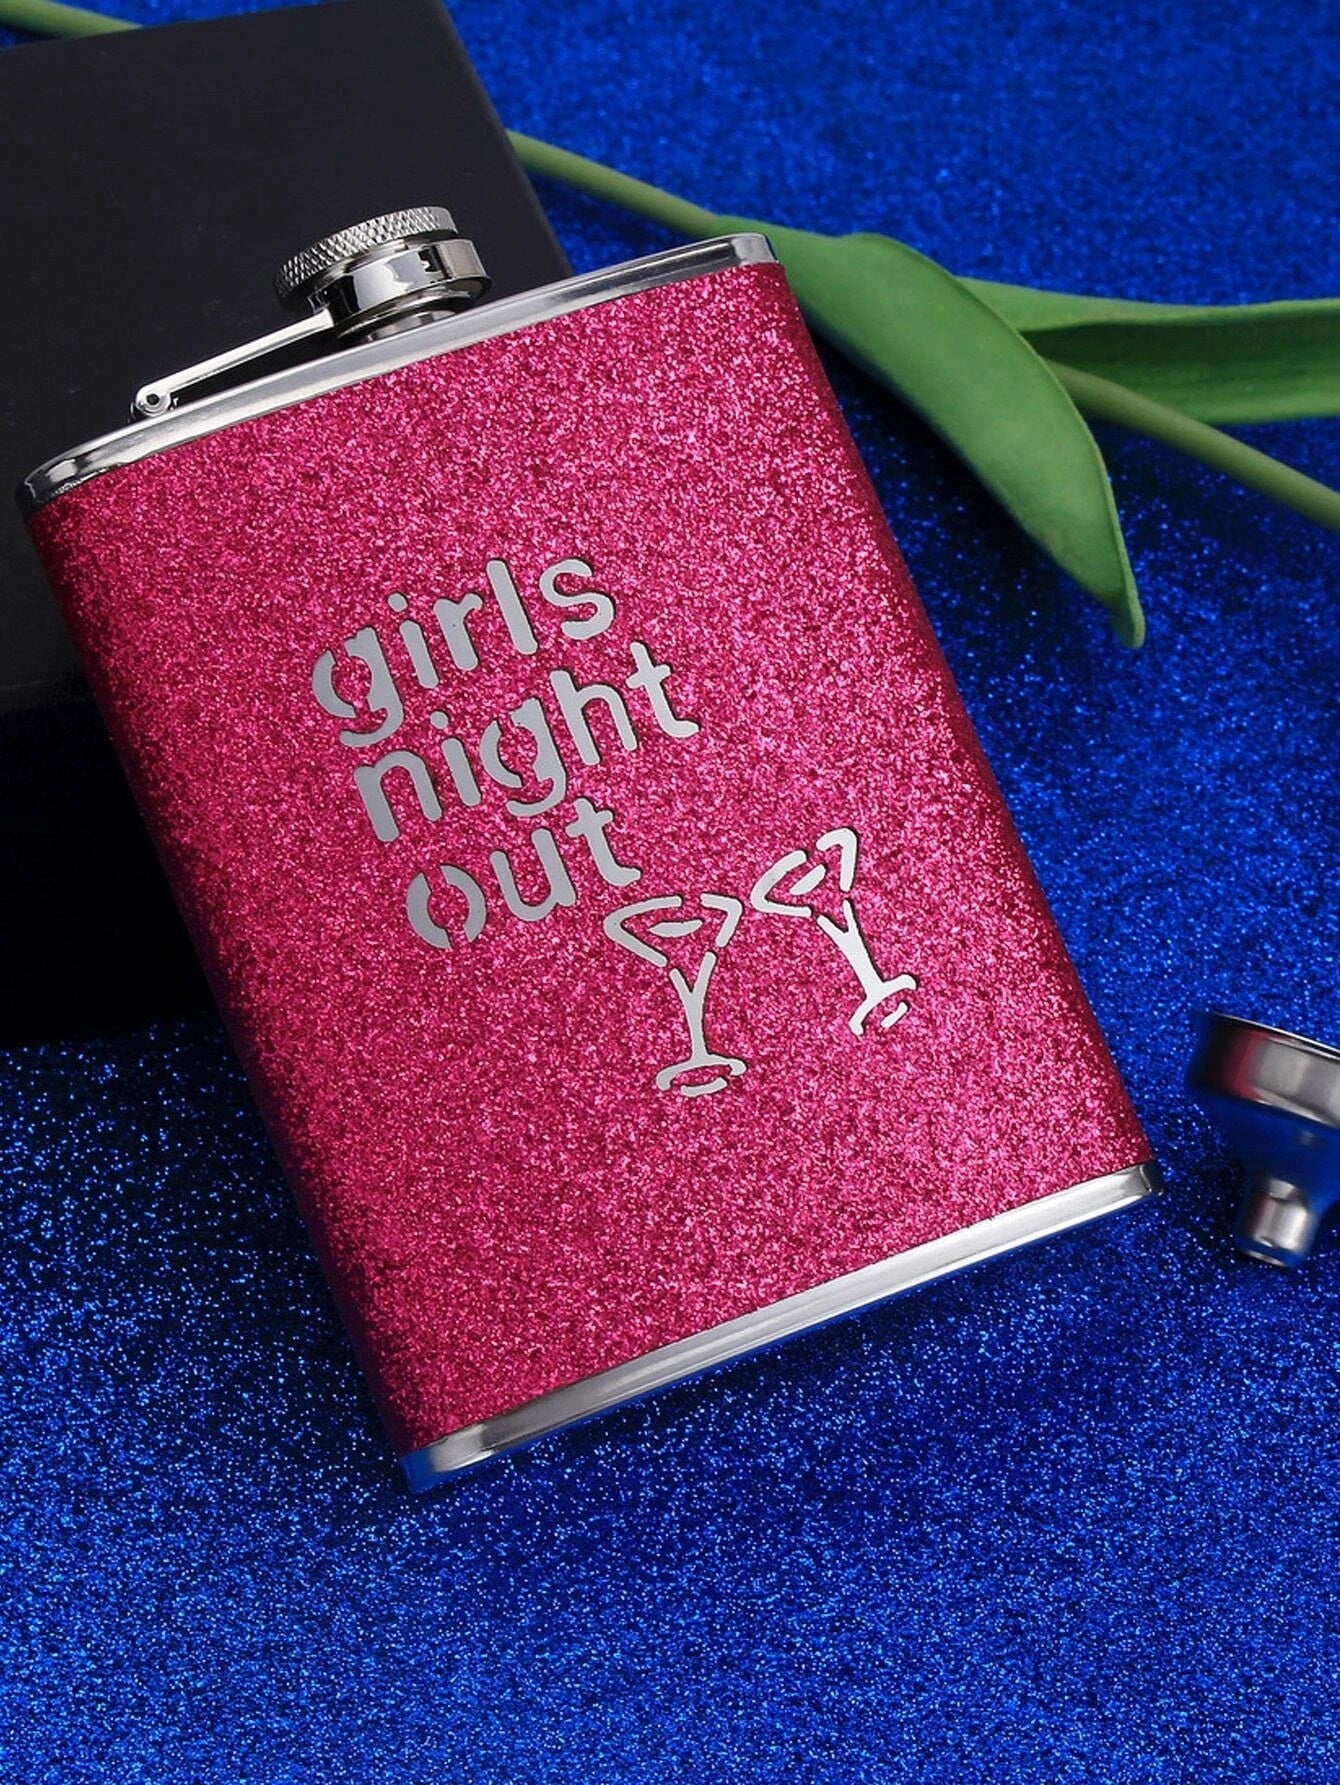 Girl's Night Out Flask